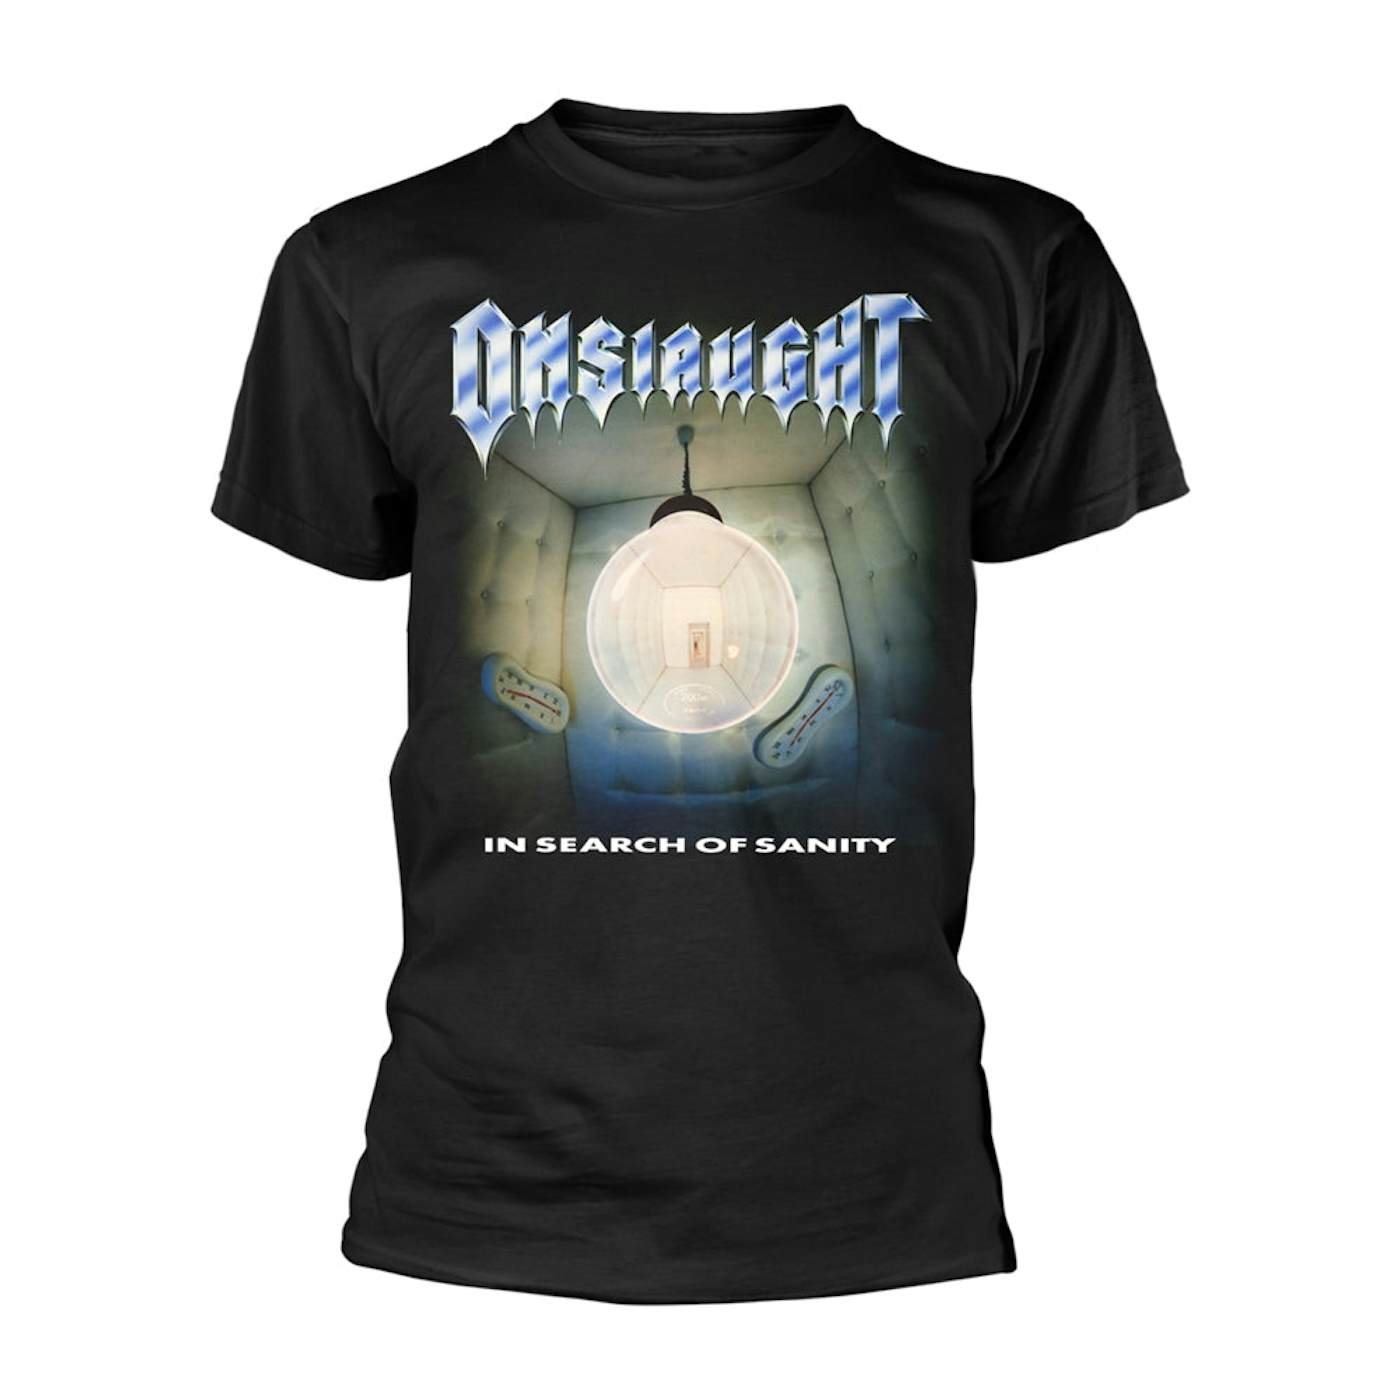 Onslaught T Shirt - In Search Of Sanity